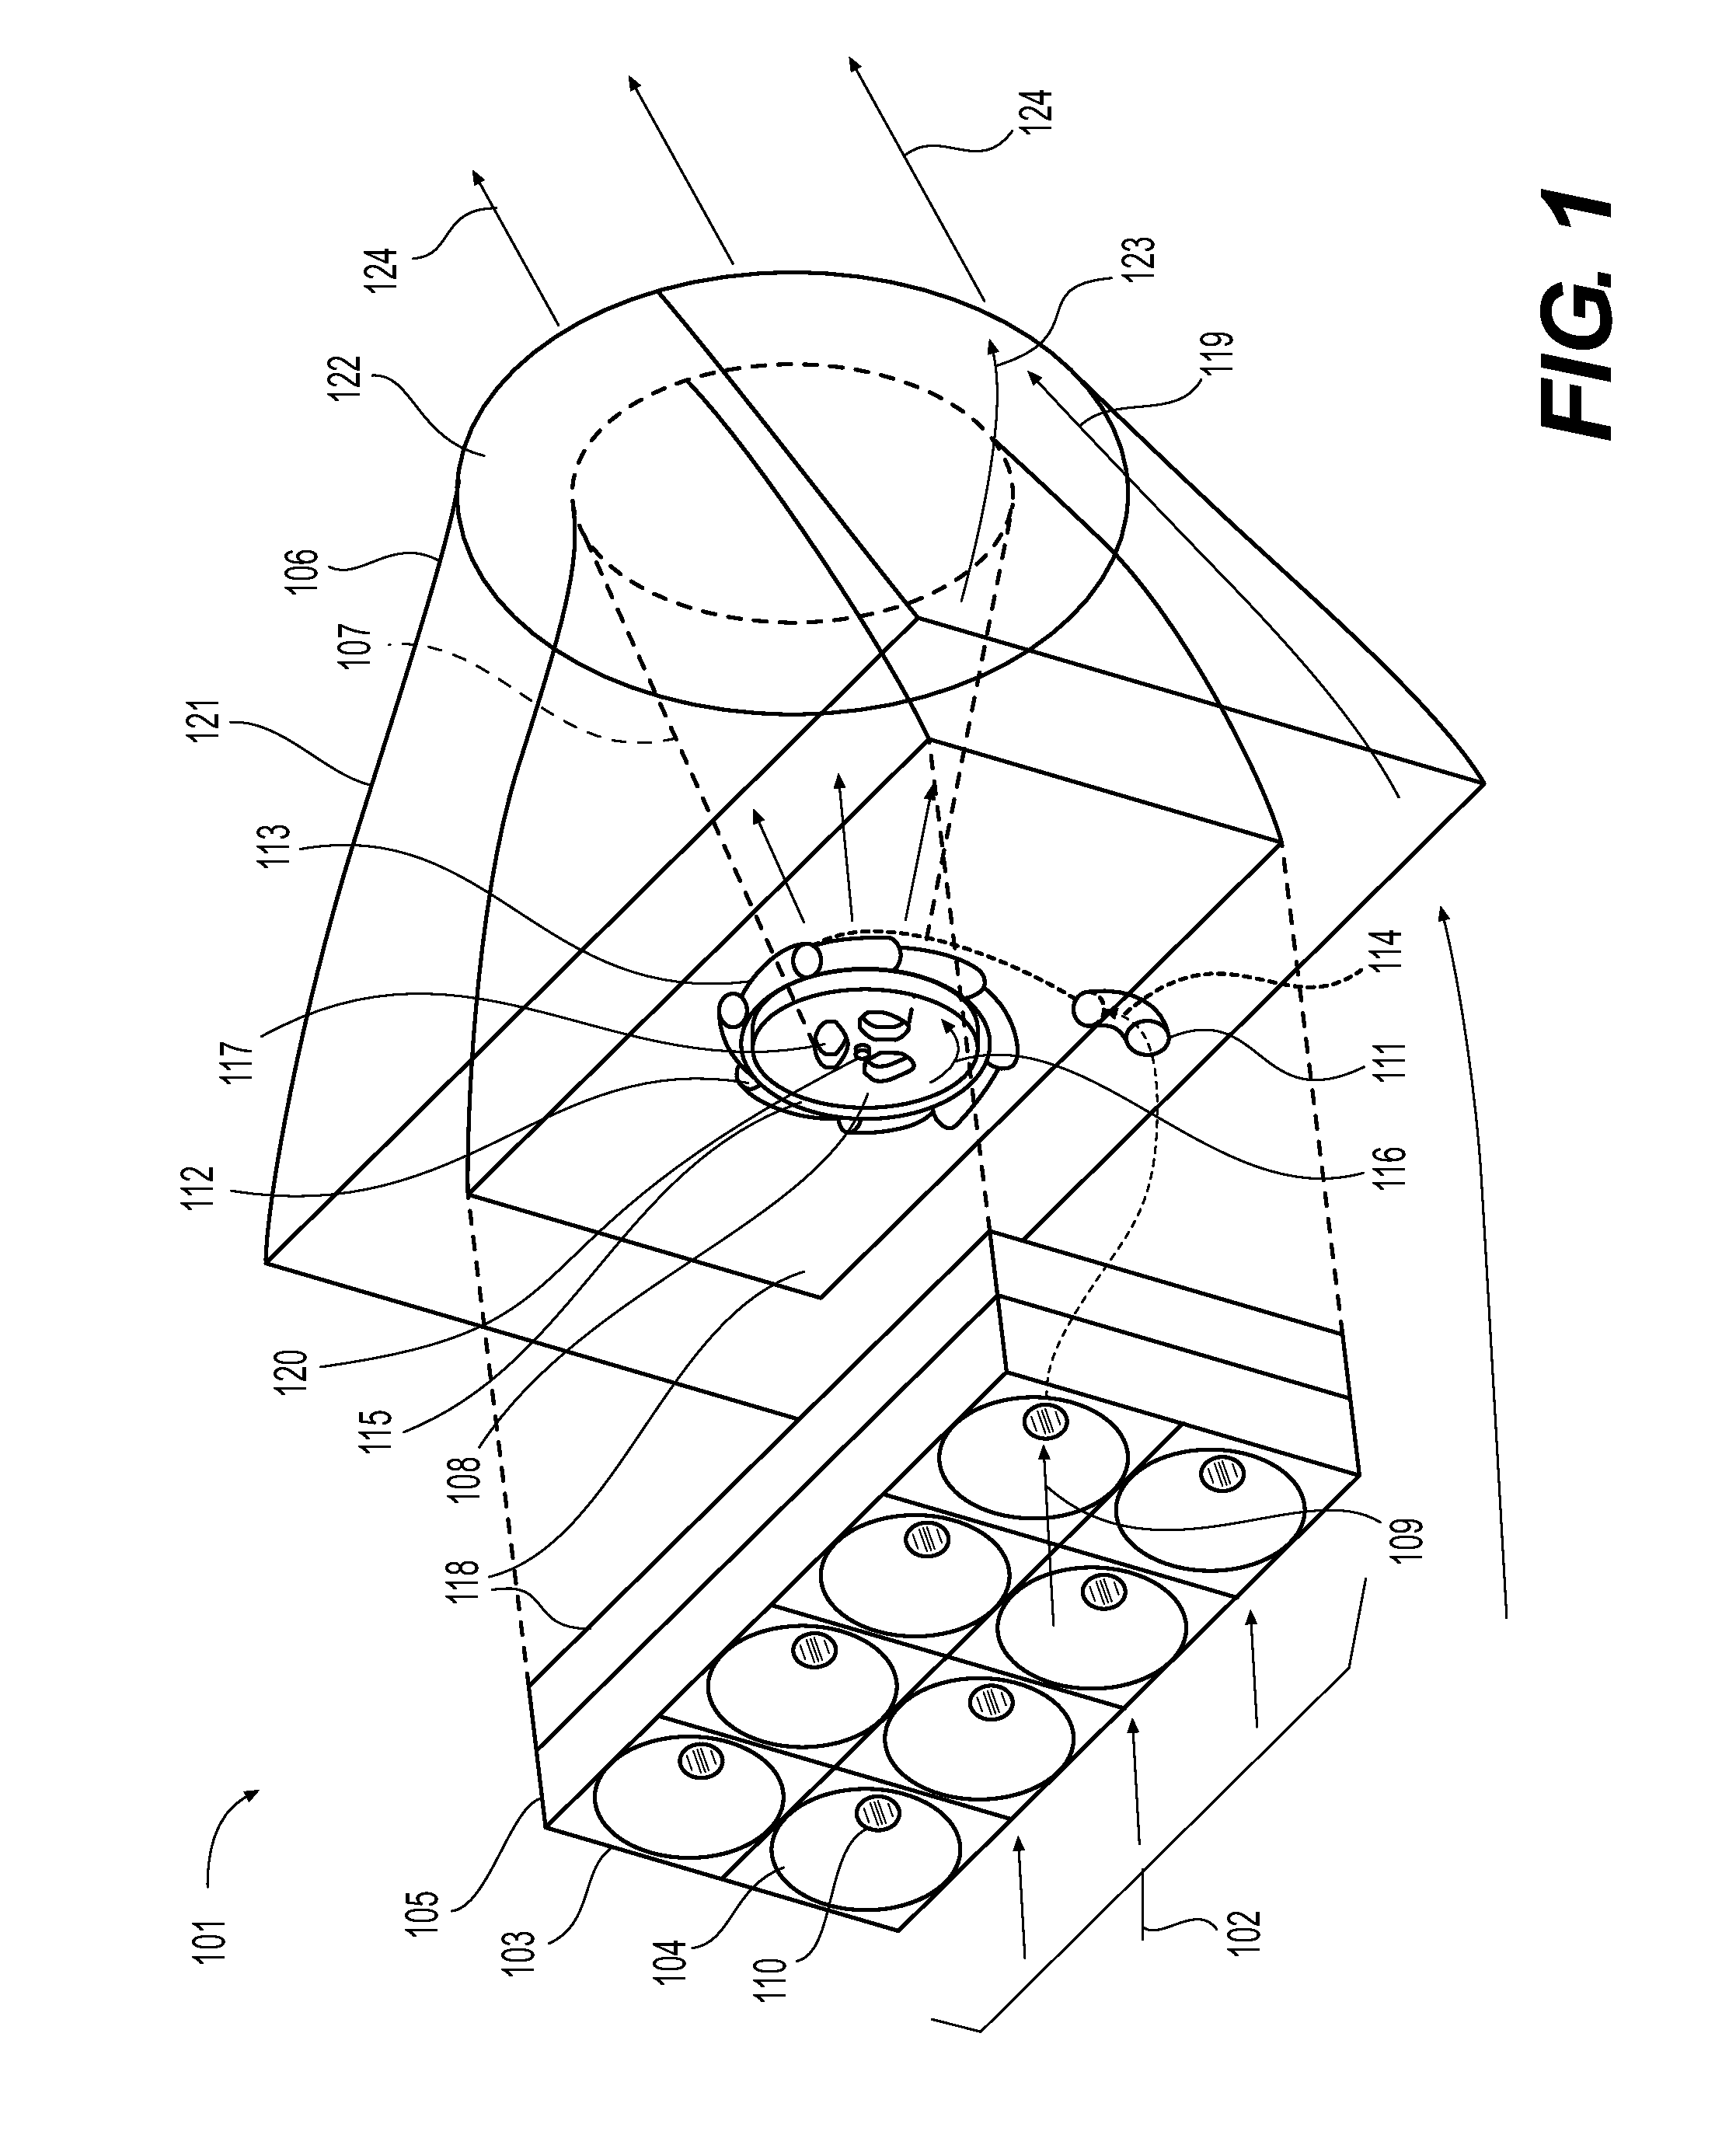 System and method for extracting power from fluid using a Tesla-type bladeless turbine